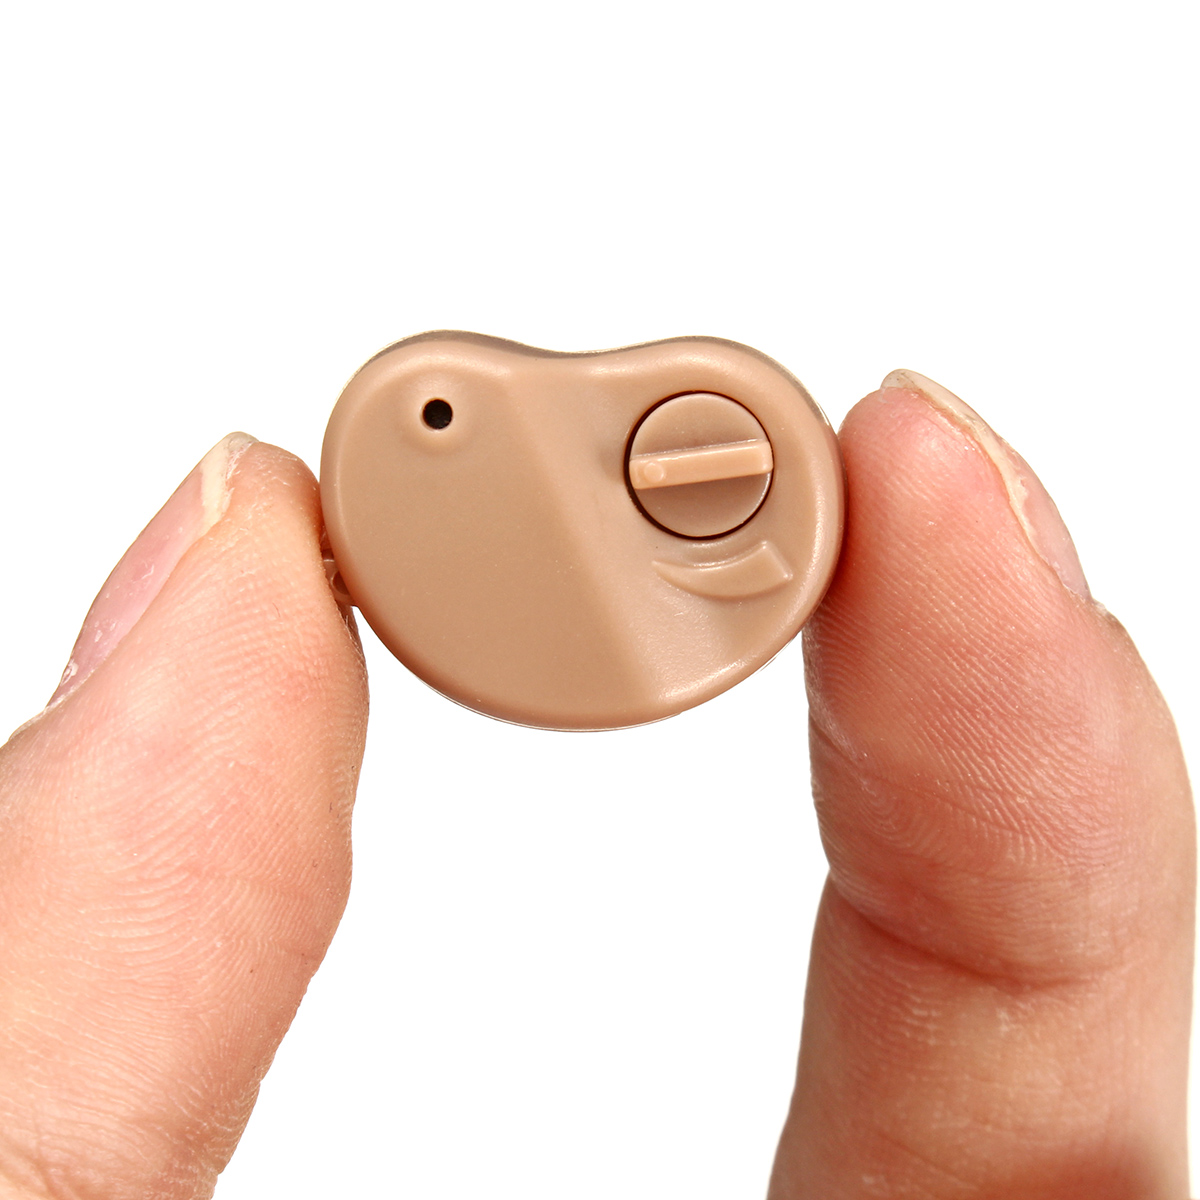 Adjustable Digital Hearing Aids Mini In-Ear Best Sound Voice Amplifier Invisible 24